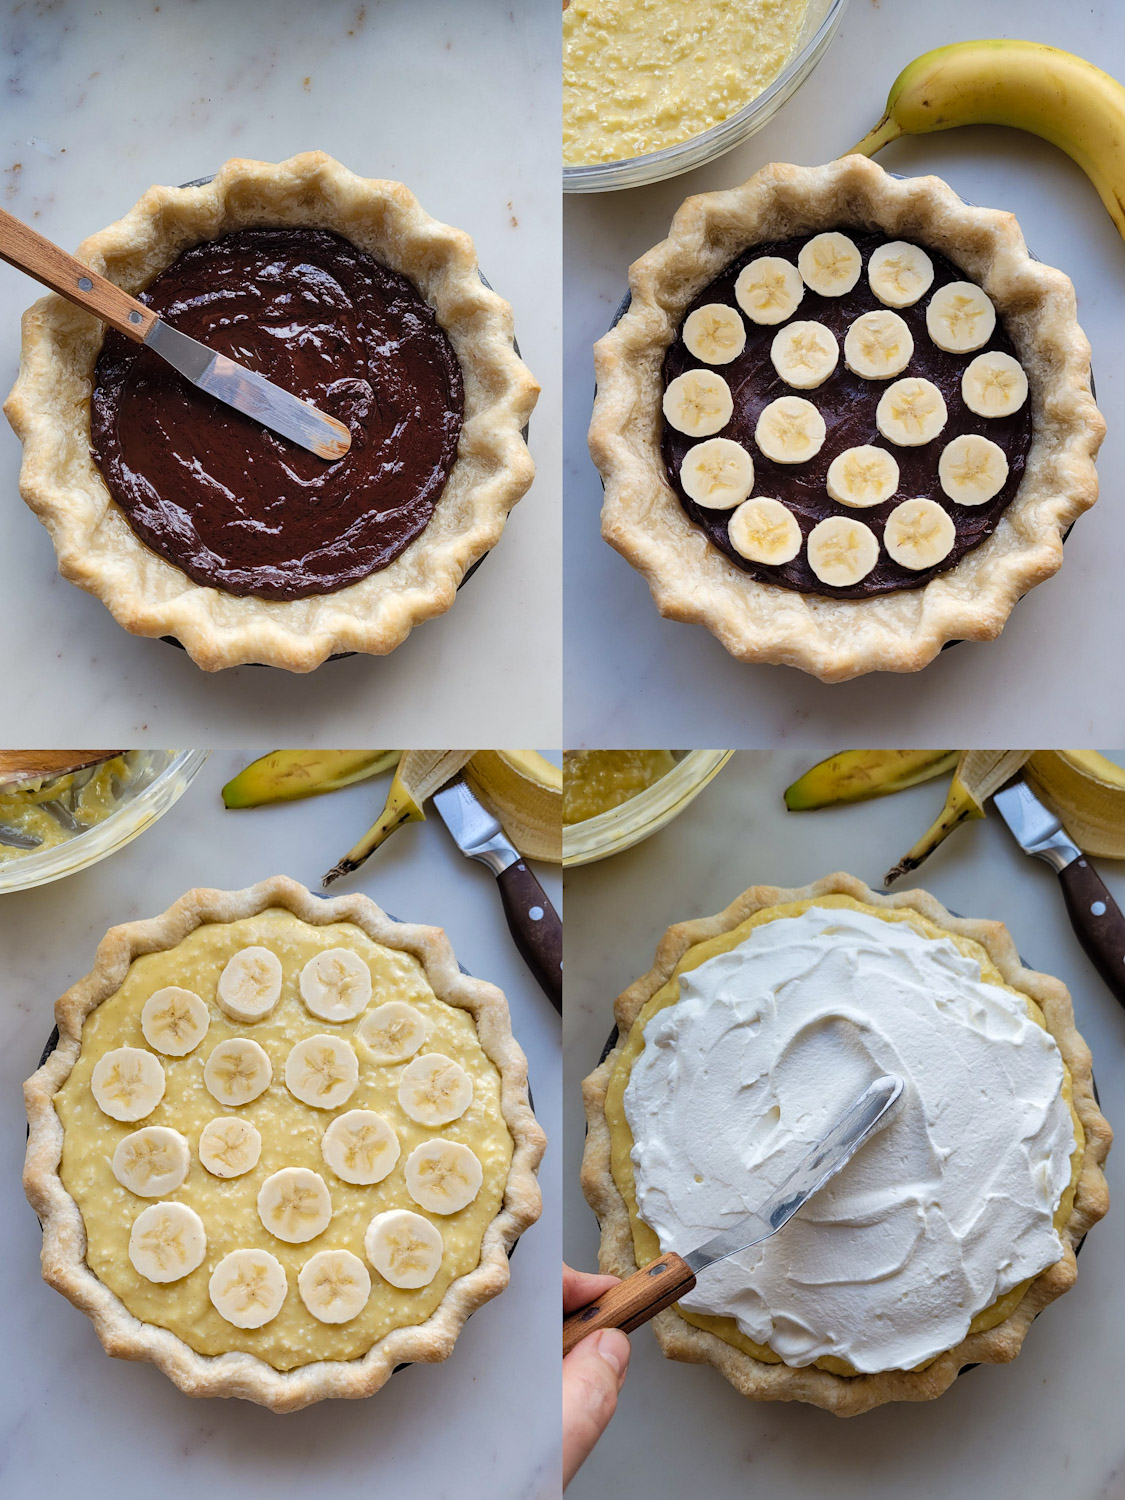 Collage showing the making of a Black Bottom Banana Coconut Cream Pie